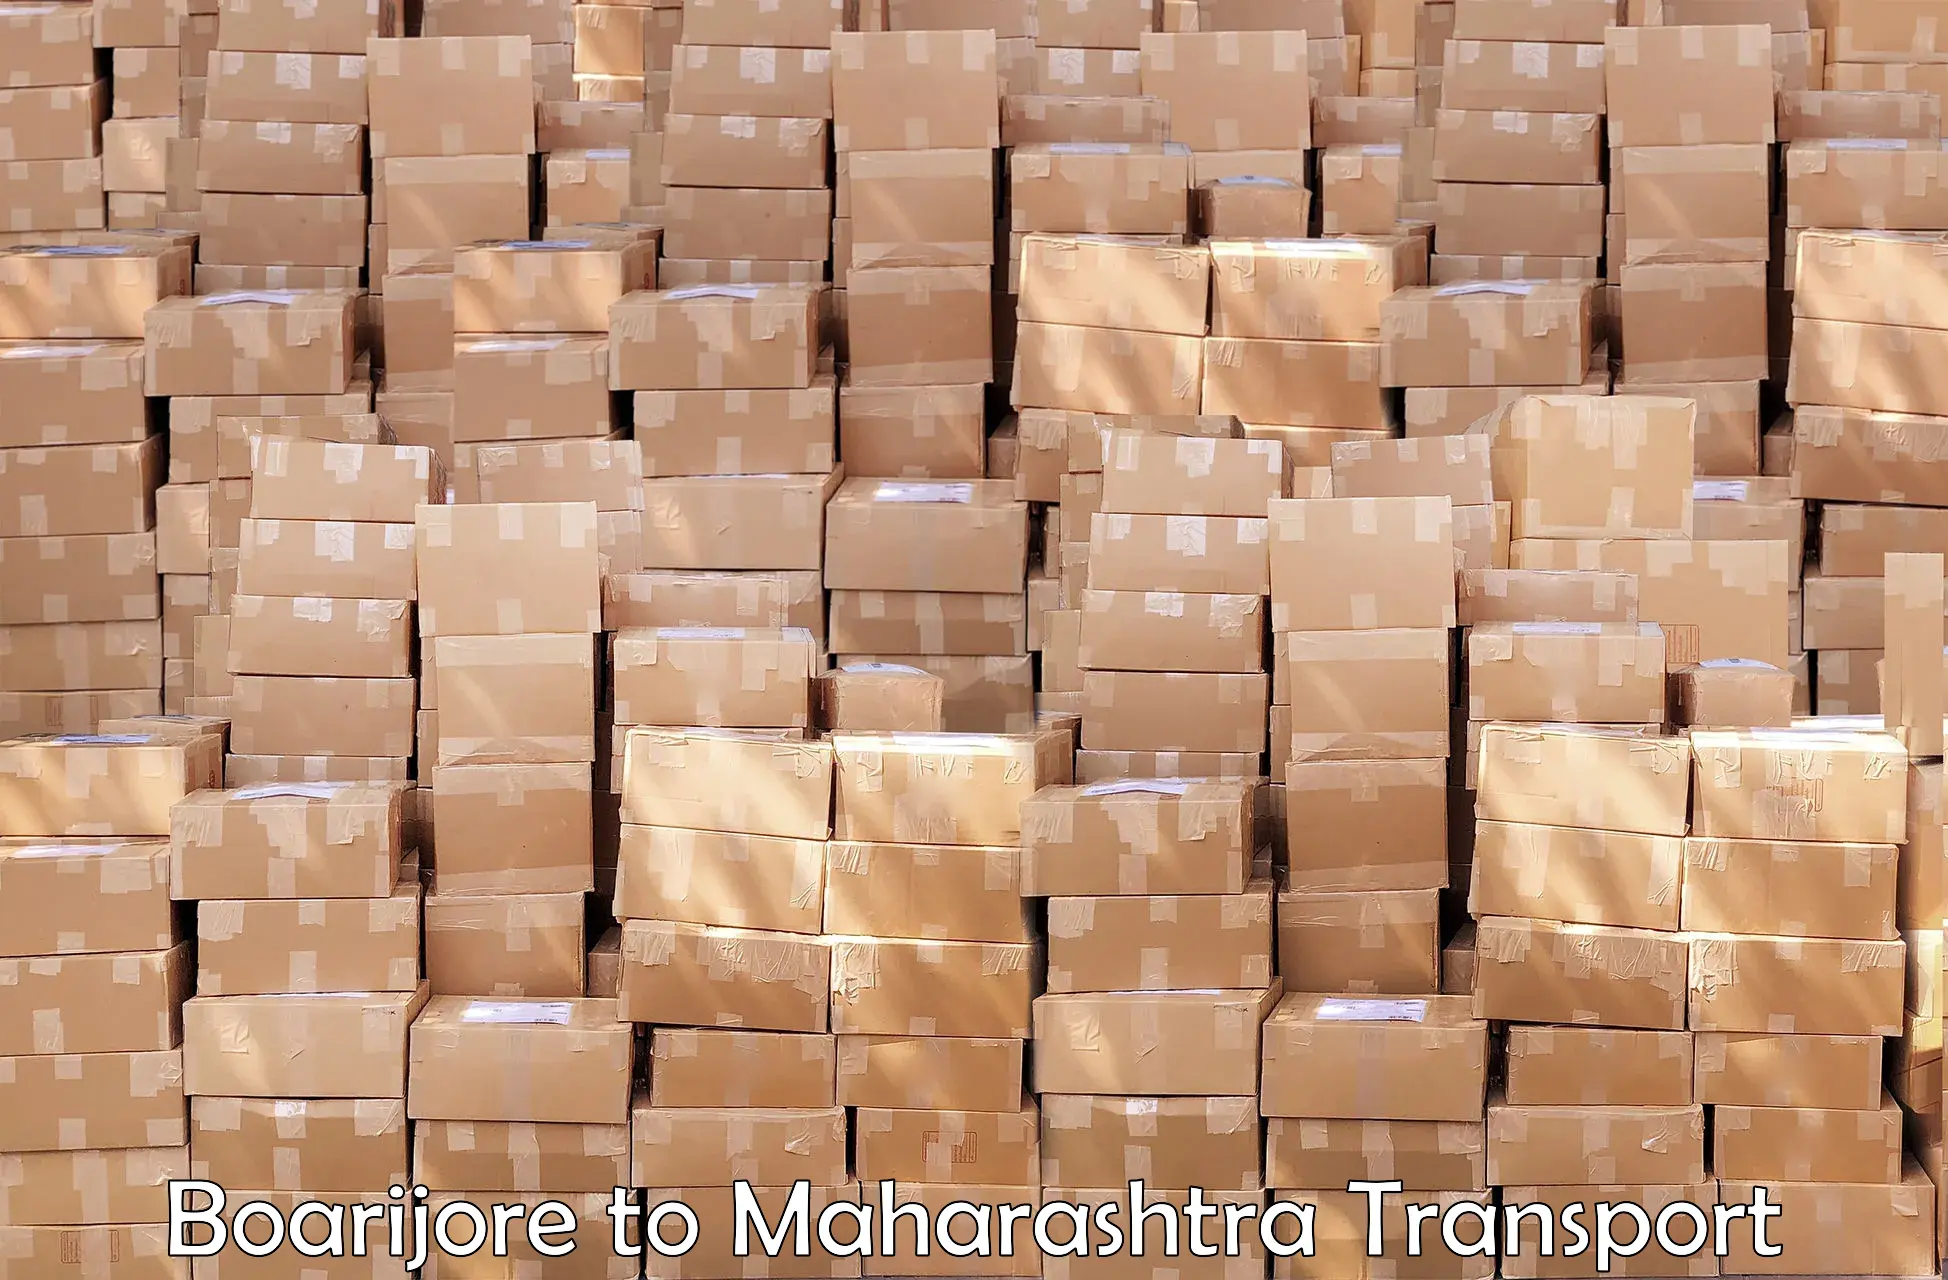 Truck transport companies in India Boarijore to Daryapur